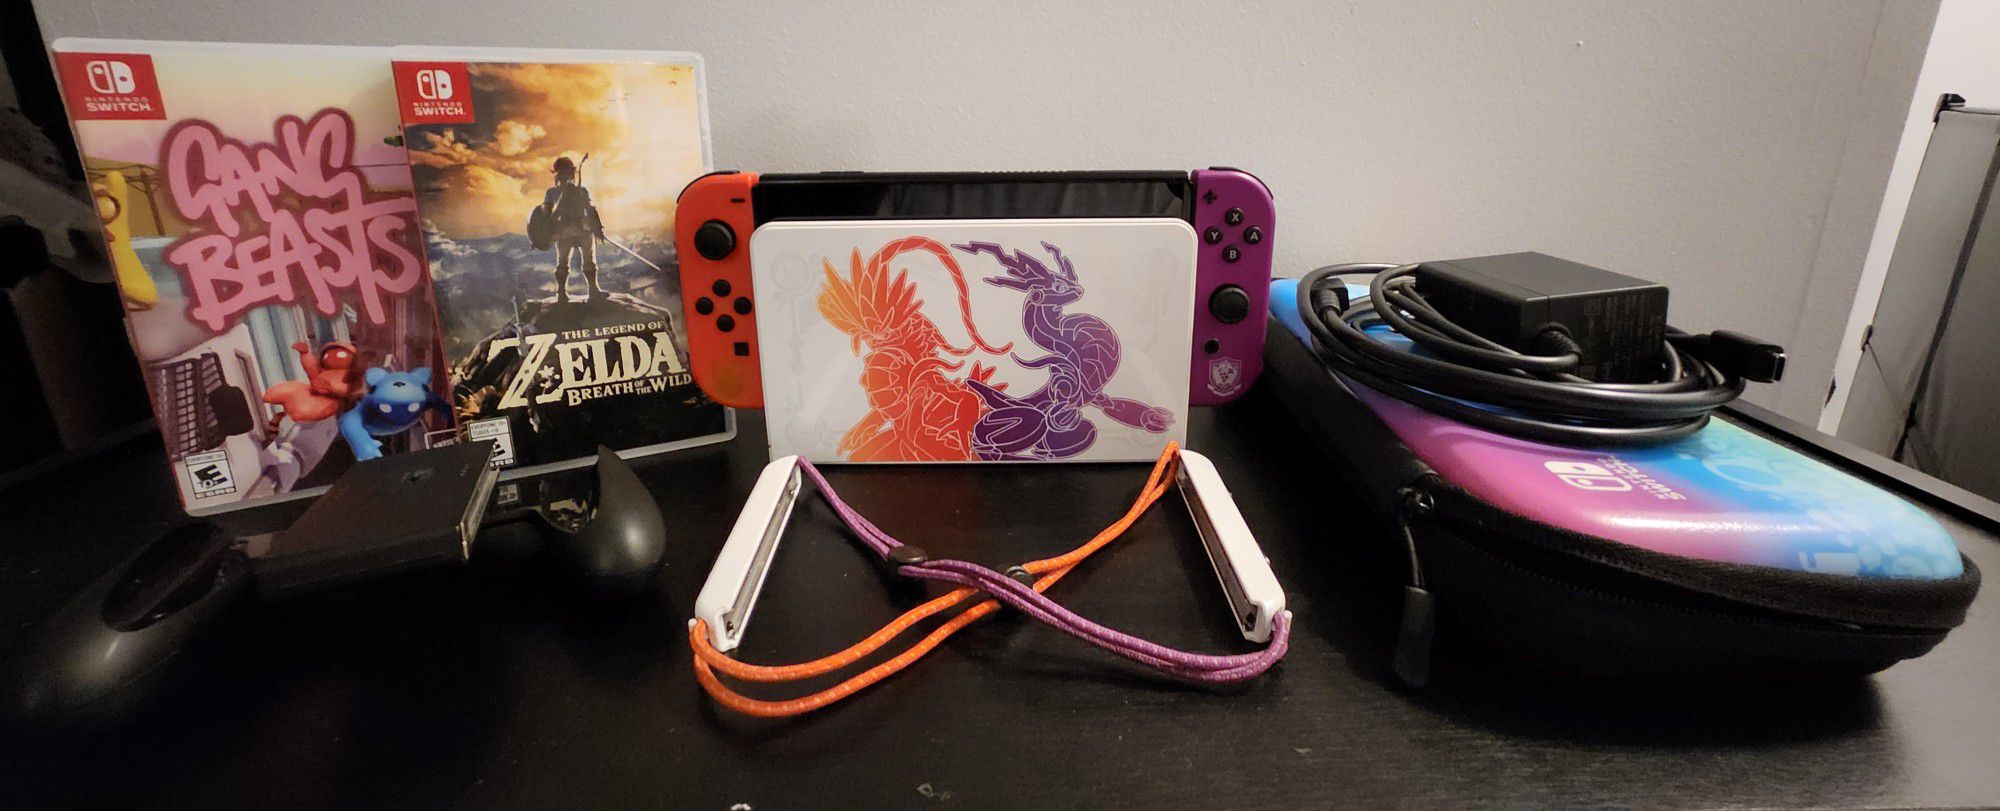 Nintendo Switch OLED - Scarlet & Violet Edition (Two Games Included, w/case)